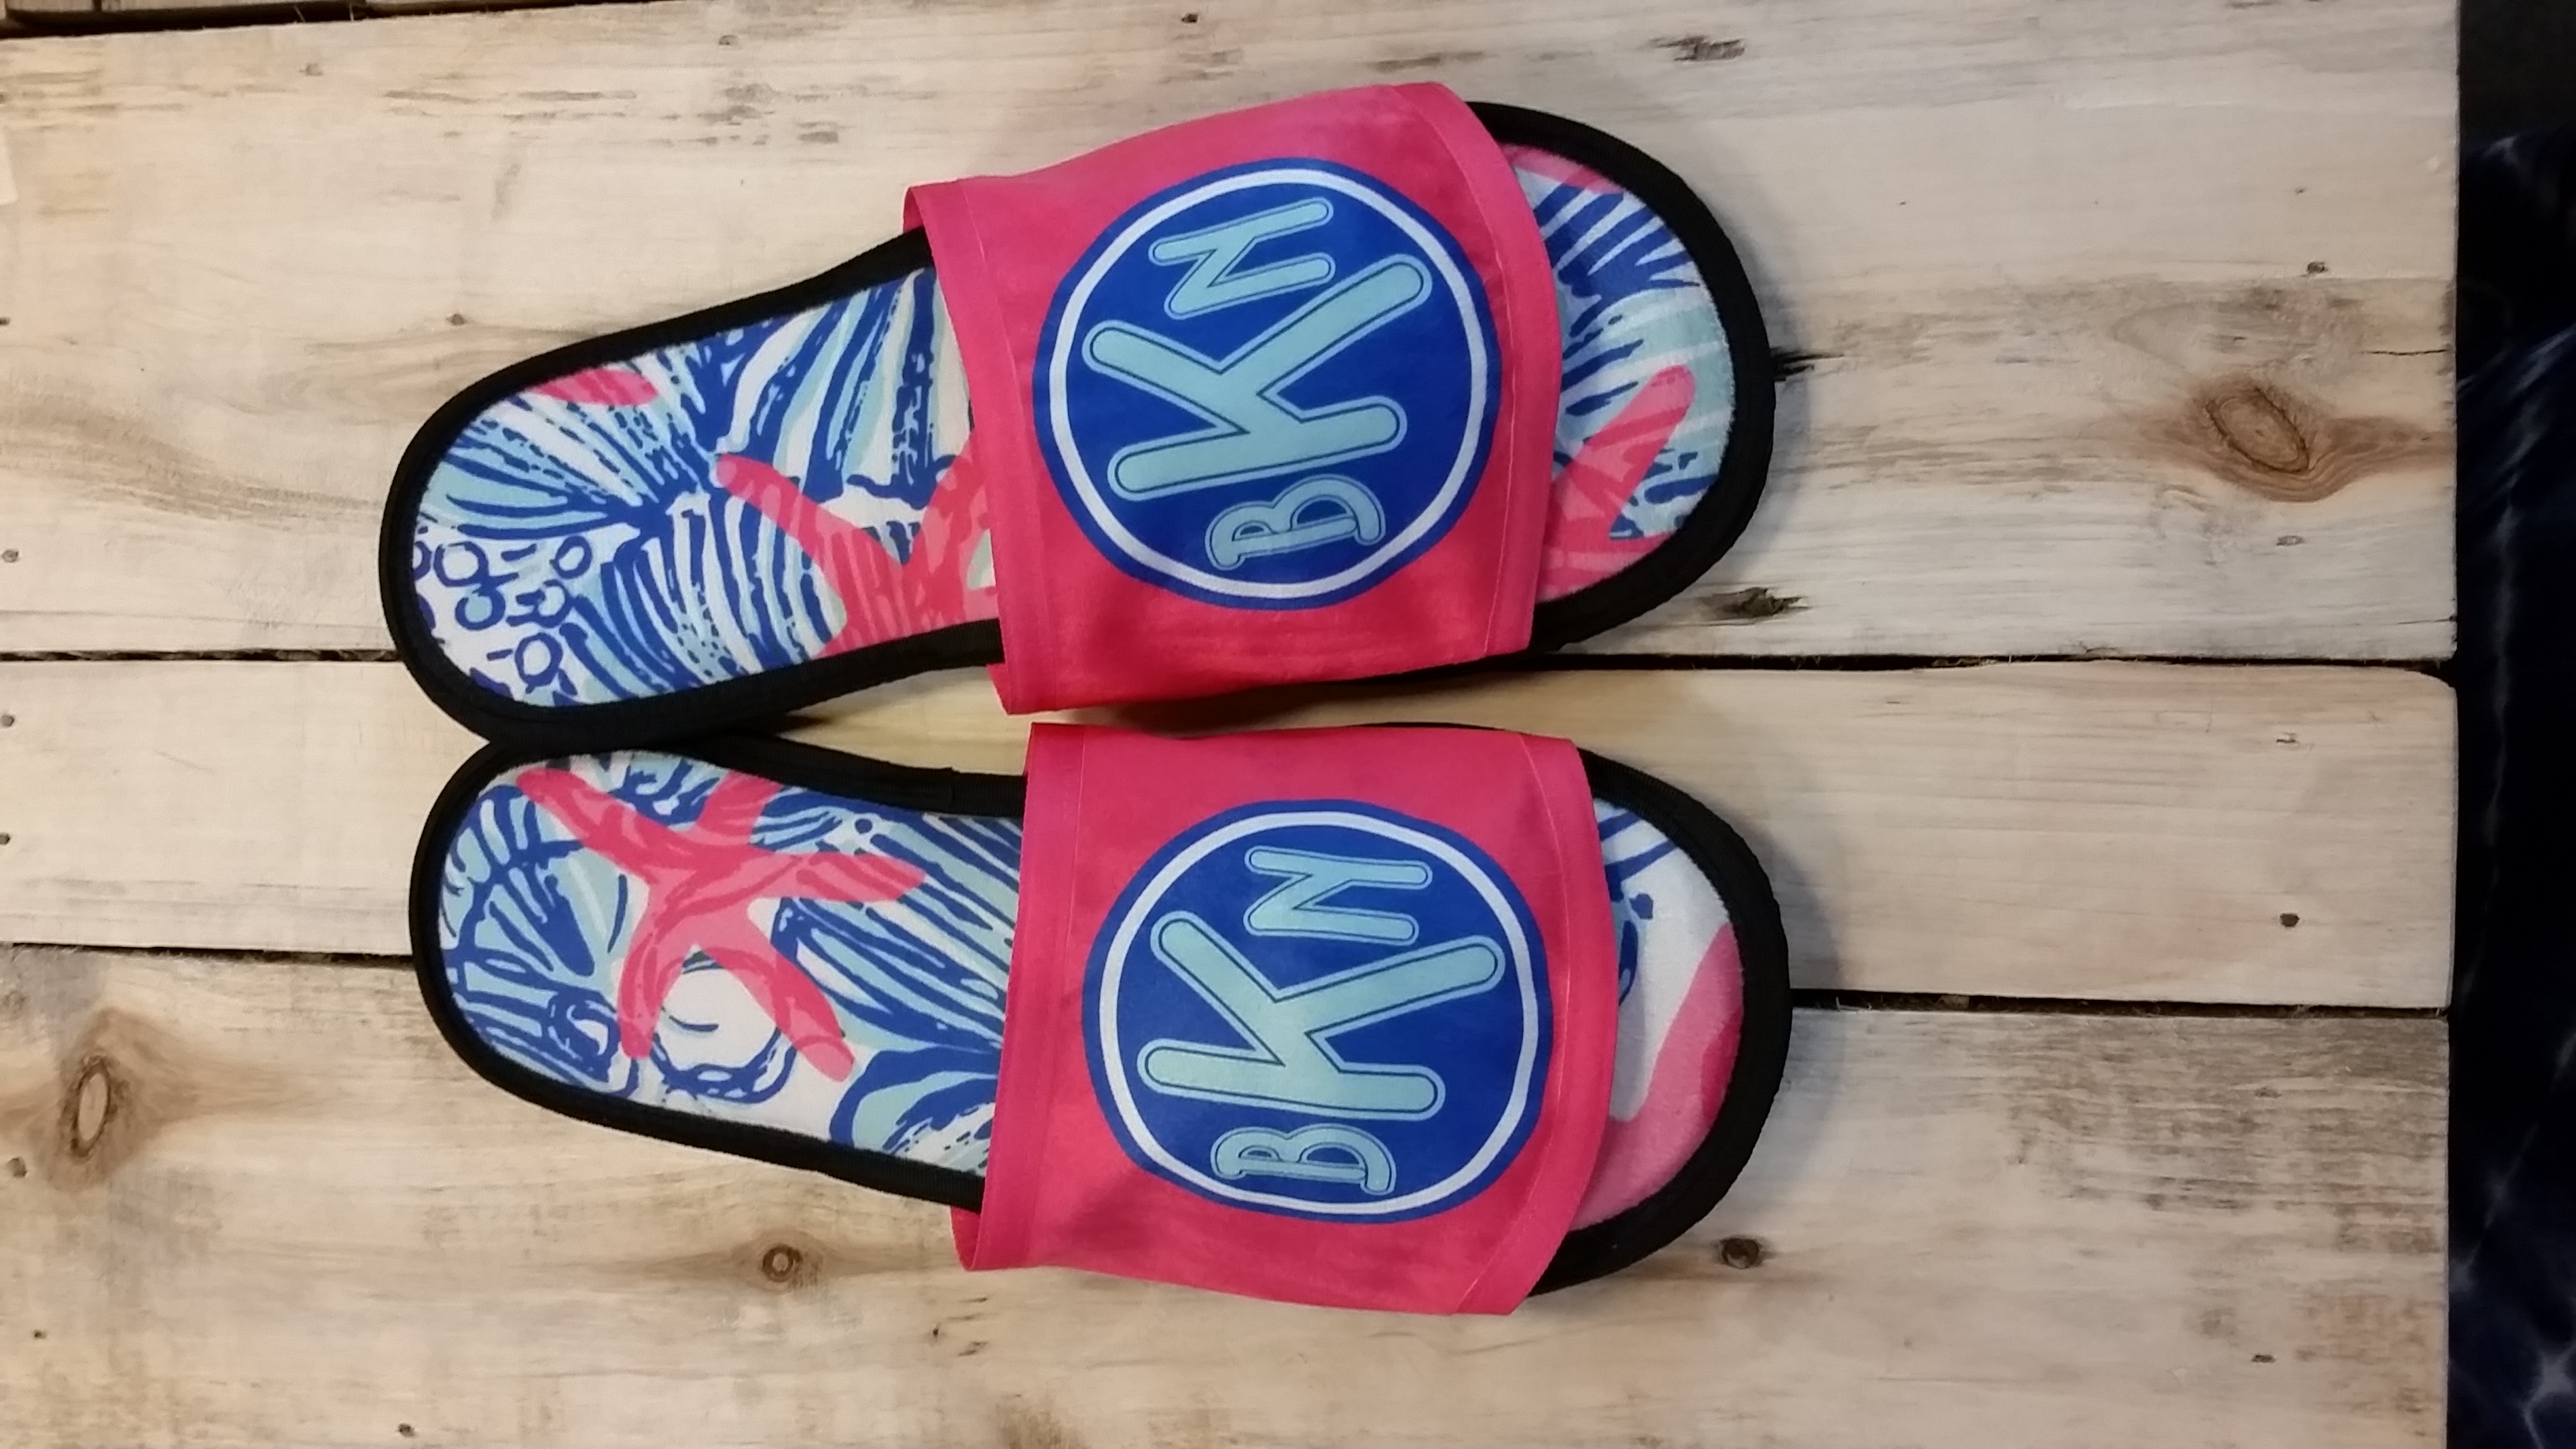 Slippers made with sublimation printing